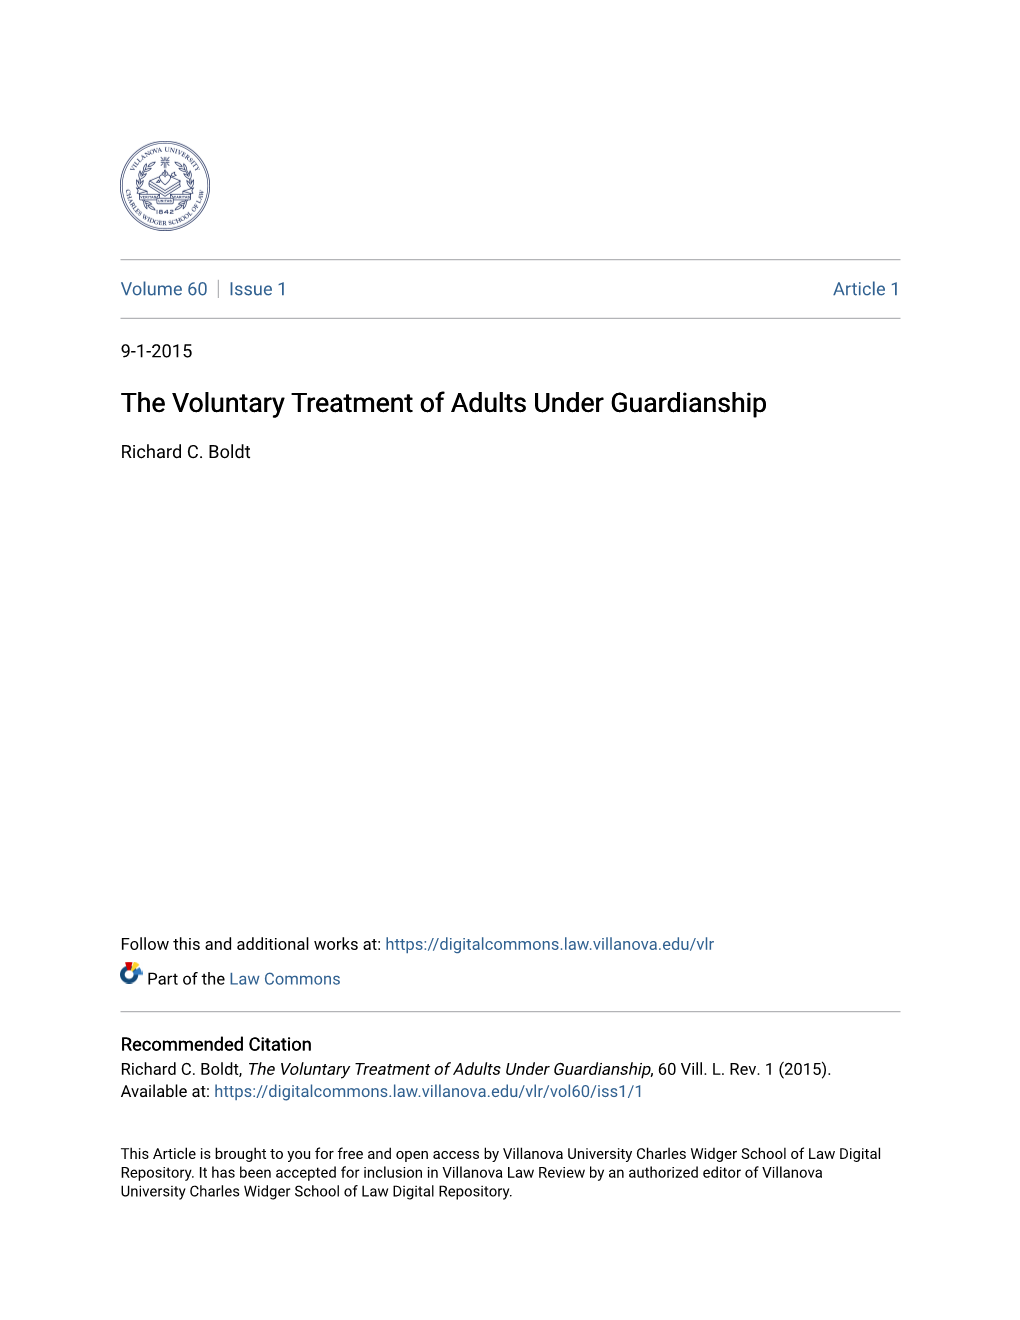 The Voluntary Treatment of Adults Under Guardianship